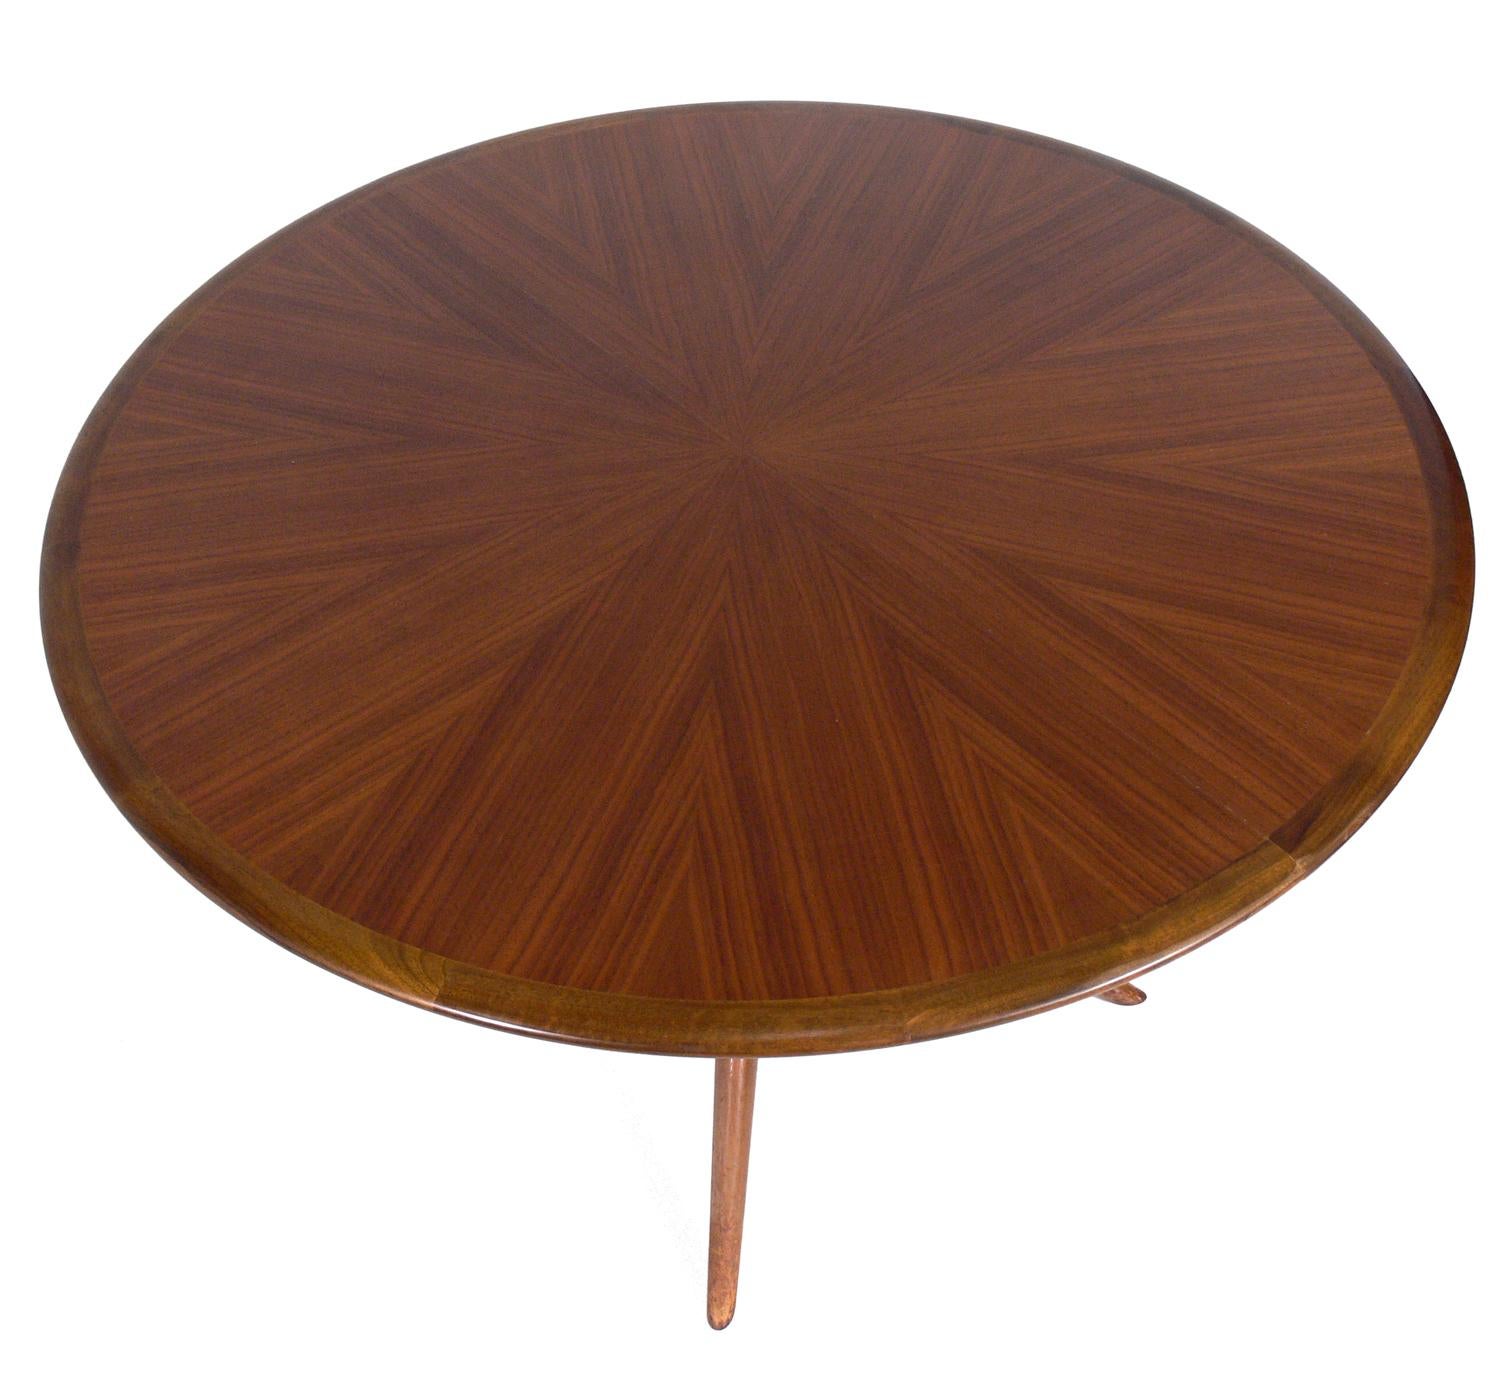 Elegant midcentury Italian dining table, design attributed to Melchiorre Bega, Italy, and possibly imported by the Erno Fabry Company, circa 1950s.
Beautiful starburst Italian walnut veneer top.

It can go from a compact footprint of a 45